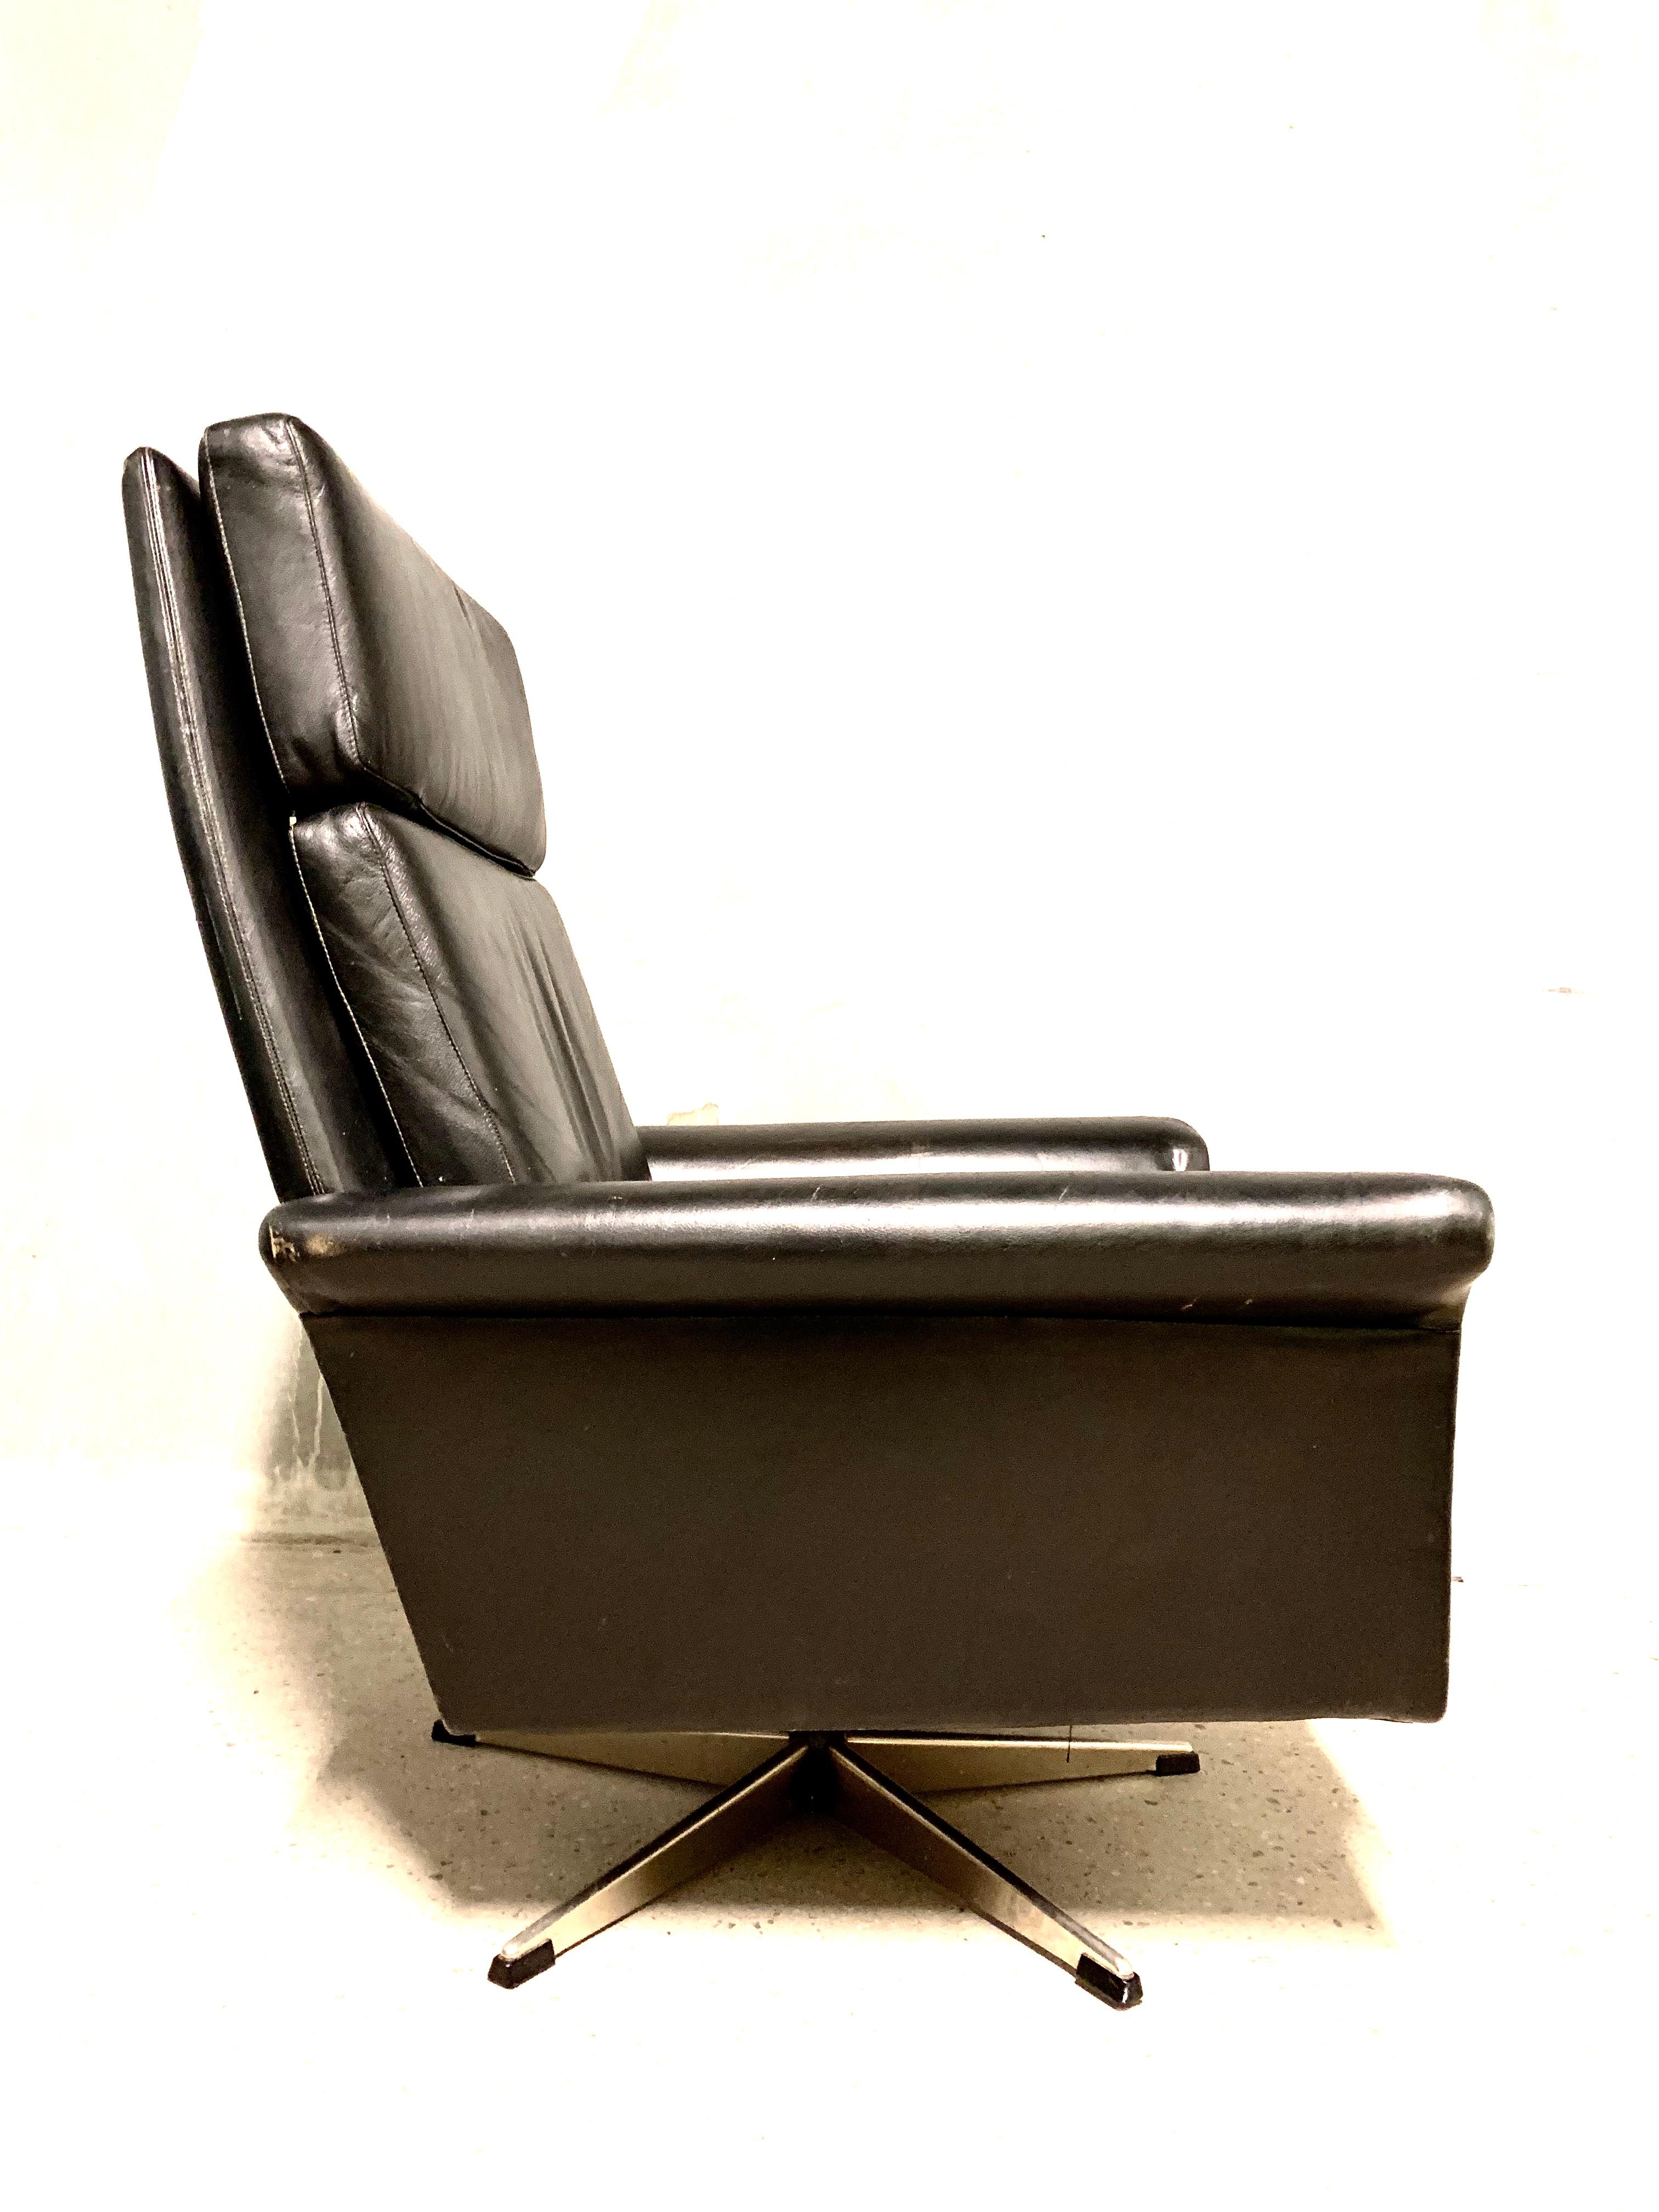 Beautiful modern swivel chair in black colored leather on a chrome-plated aluminum-plated swivel base. The chair is in good vintage condition with lovely patina. Designed by Georg Thams and executed by Vejen Polstermøbelfabrik.
  